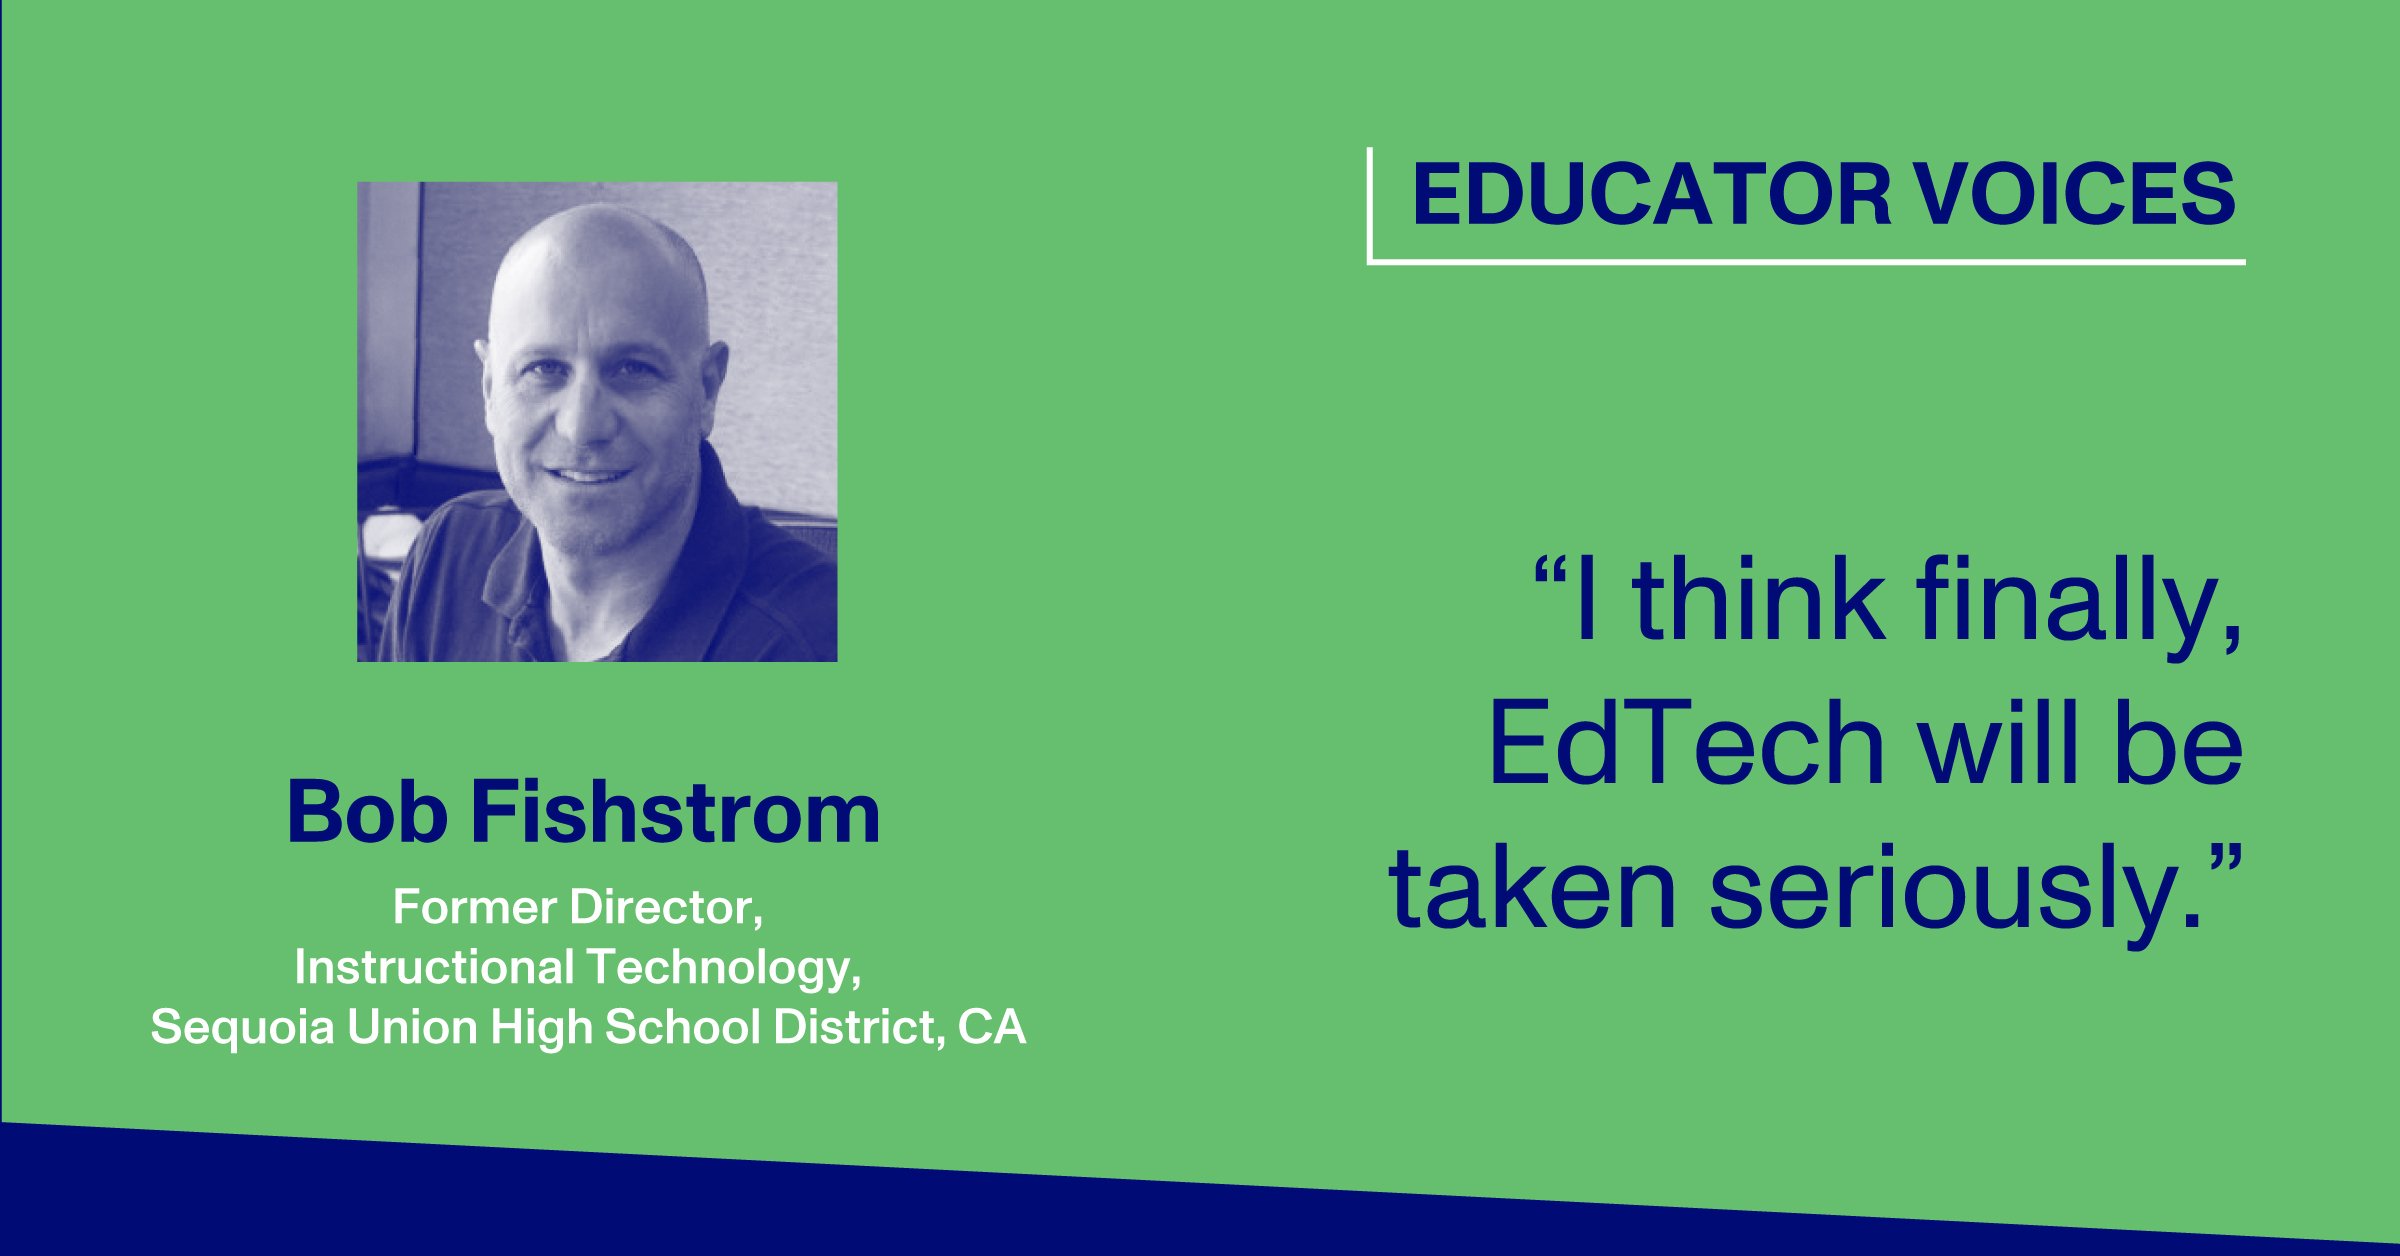 Bob Fishtrom, Former Director, Instructional Technology, Sequoia Union High School District, CA: “I think finally, EdTech will be taken seriously.”